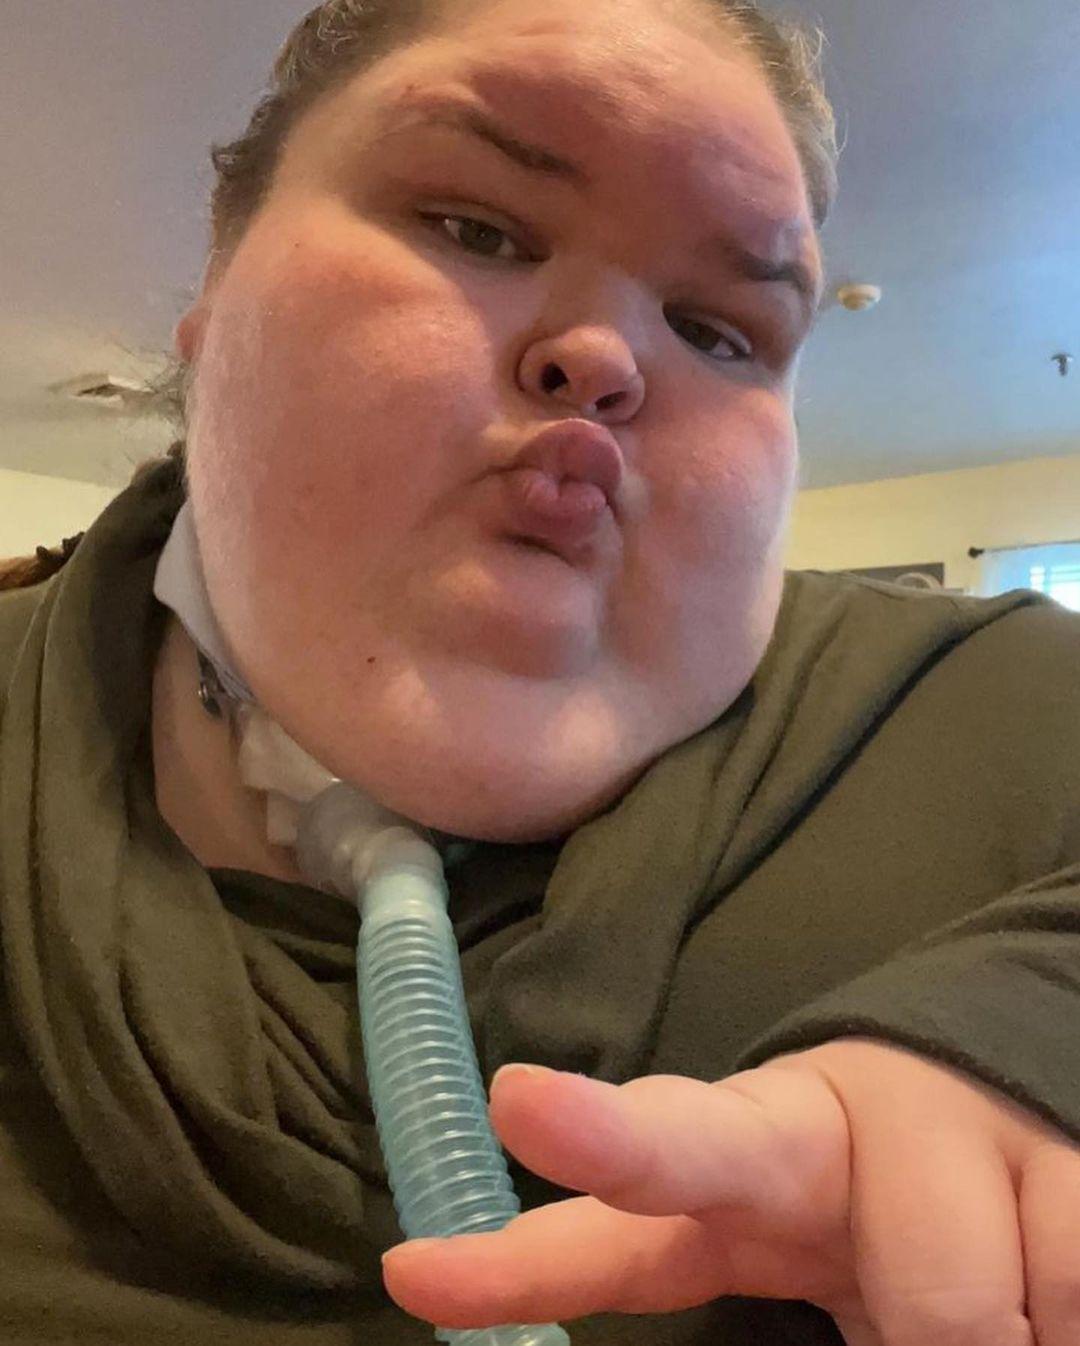 '1000-LB Sisters' Star Shares Shocking Photos With Tracheostomy Tube